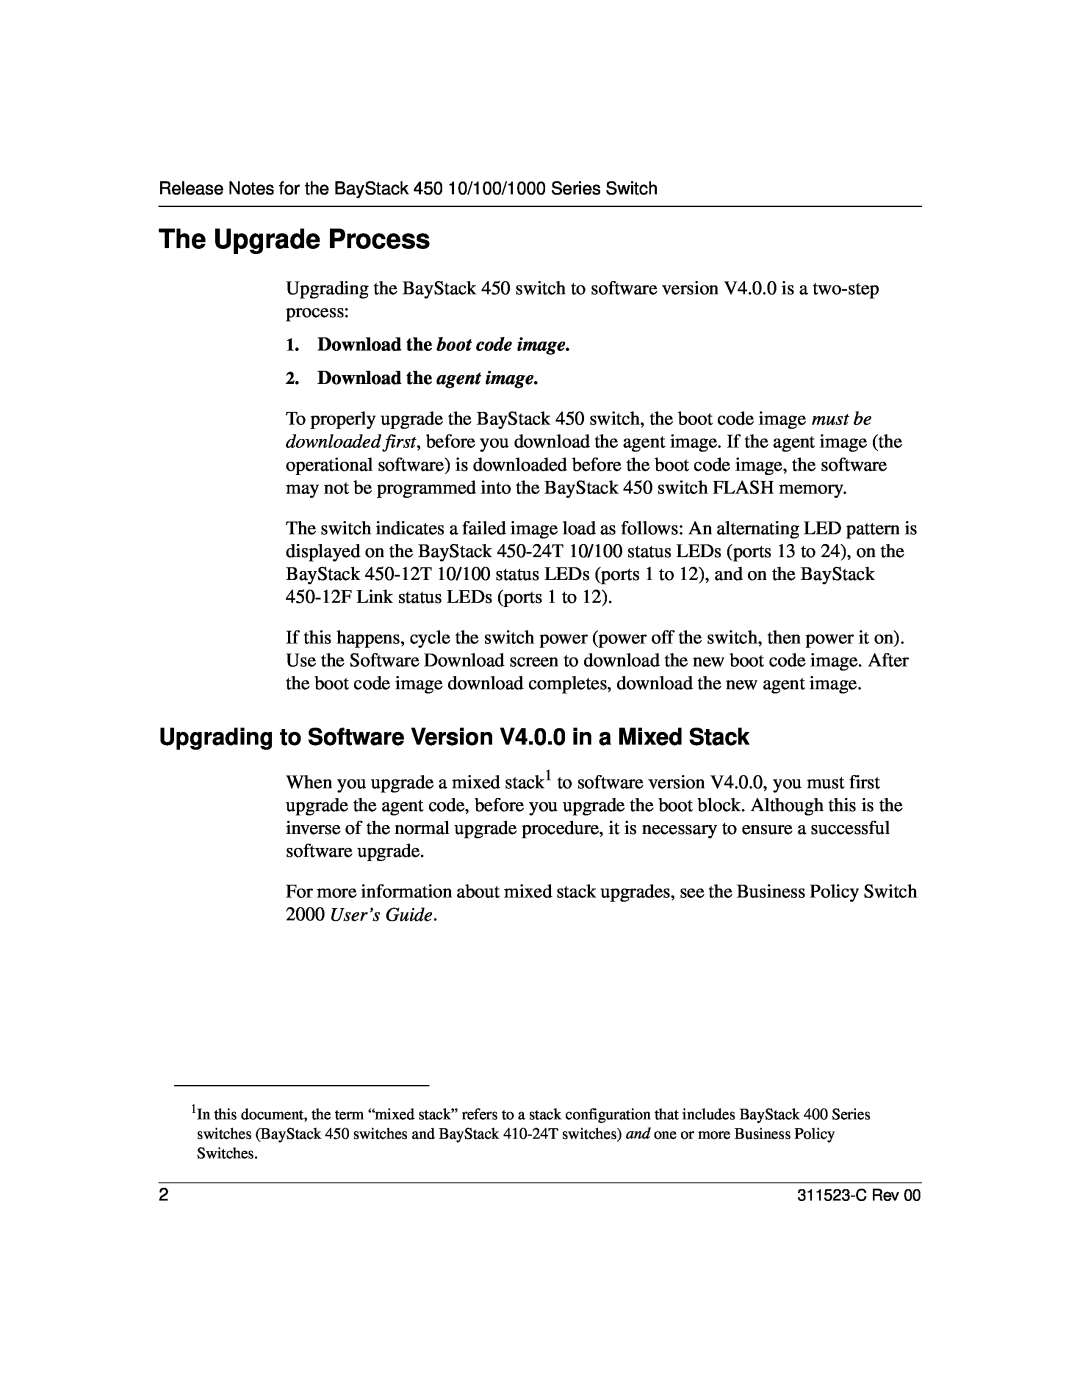 Nortel Networks 100 manual The Upgrade Process, Upgrading to Software Version V4.0.0 in a Mixed Stack 